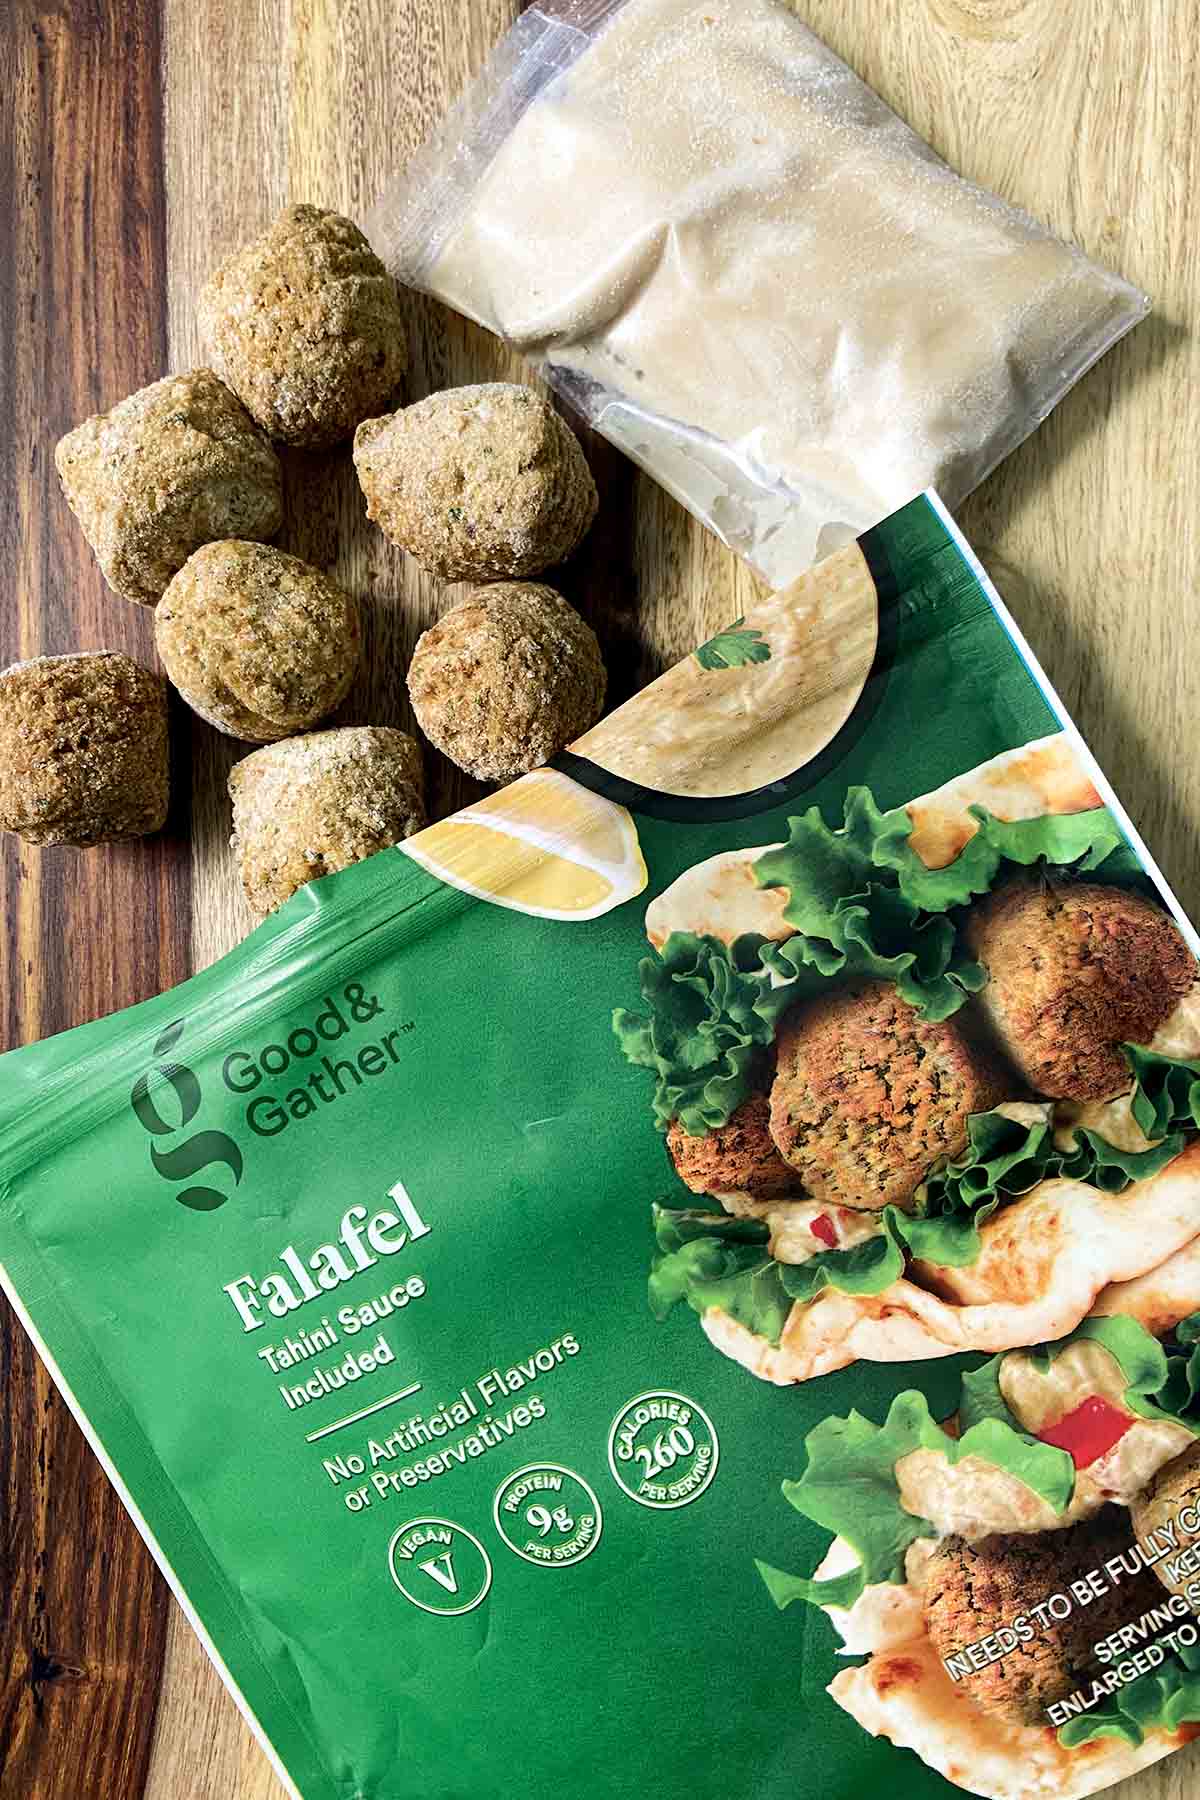 frozen Good & Gather Falafel on a wooden butcher block table next to the sauce packet